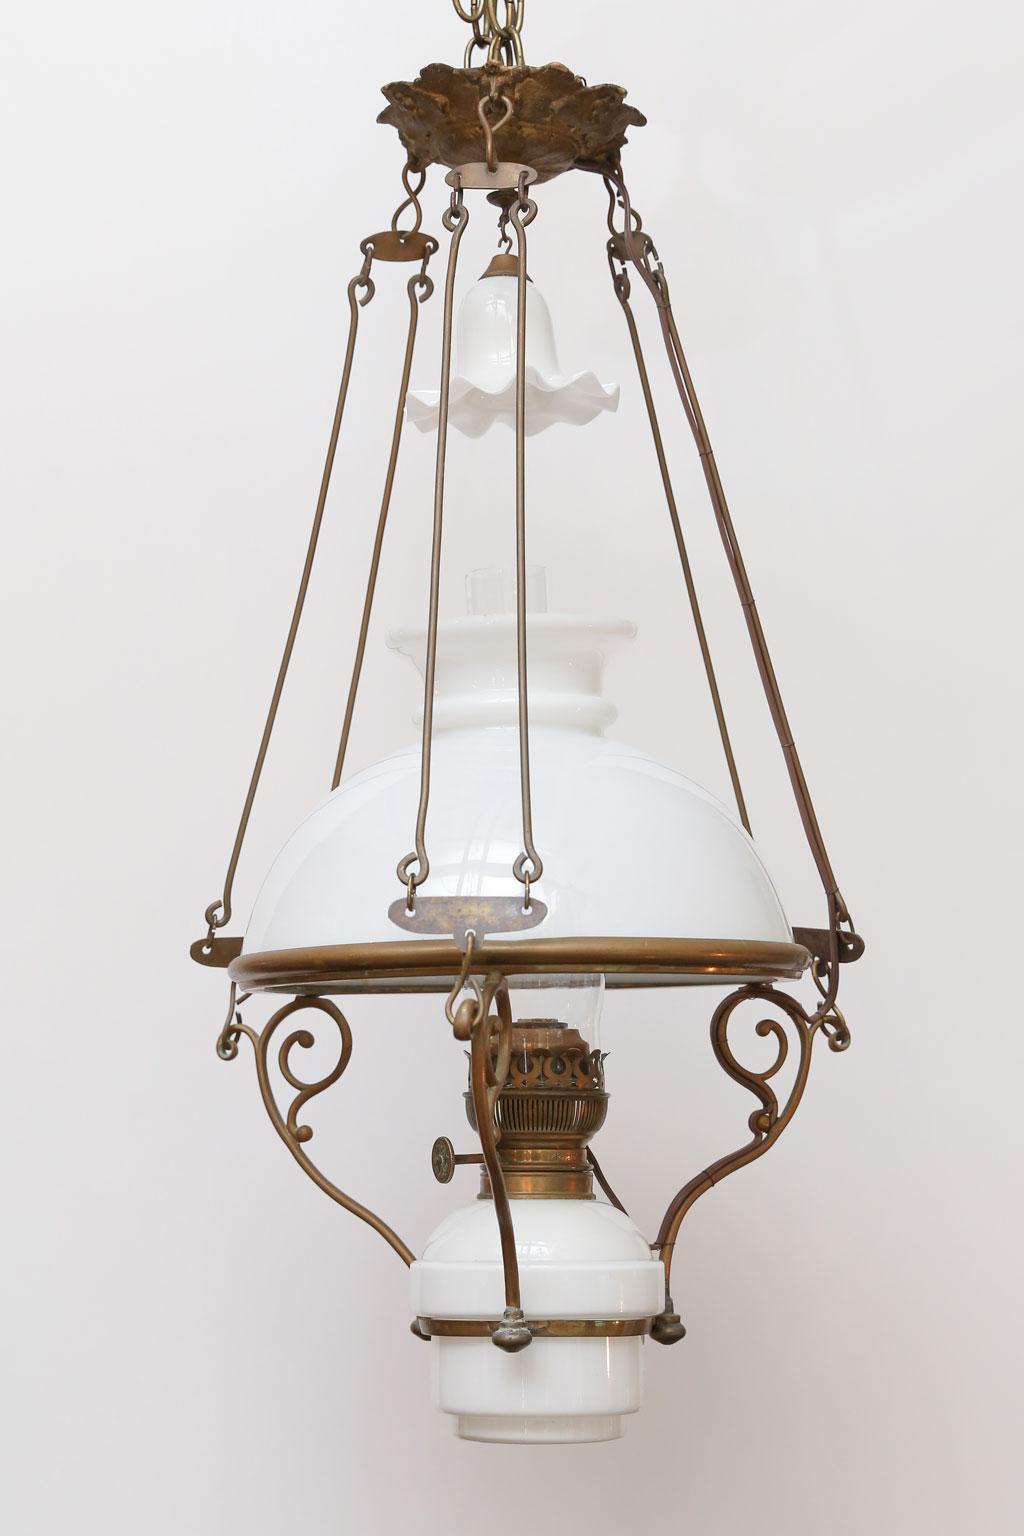 Antique French milk glass hall lantern, originally operated by oil and now newly wired for use within the USA (using all UL approved parts) as a hanging pendant or lantern fixture. Wonderful and unique this circa 1900 hall lantern consists of a milk